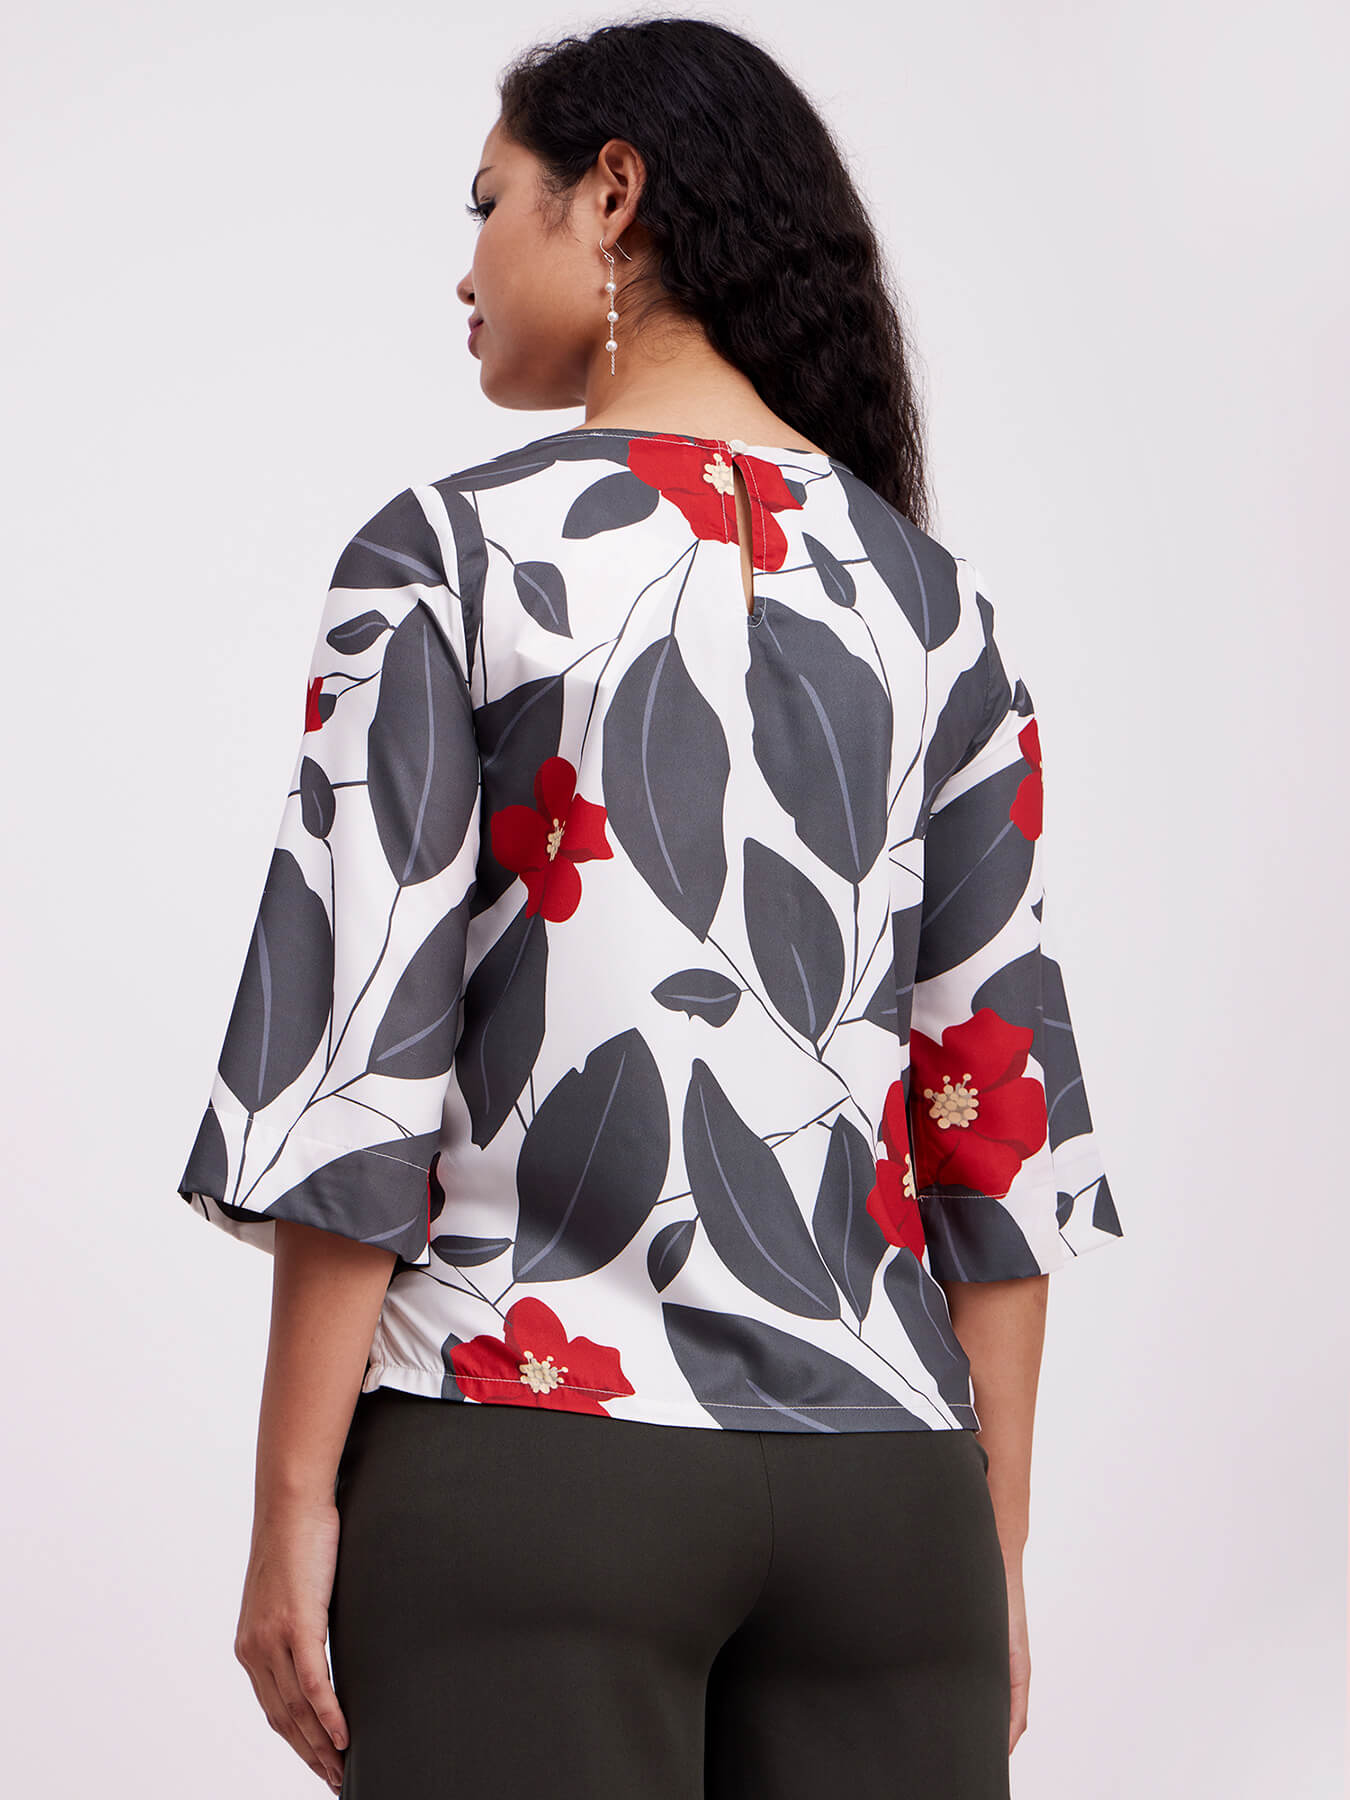 Floral Print Round Neck Top - White And Grey